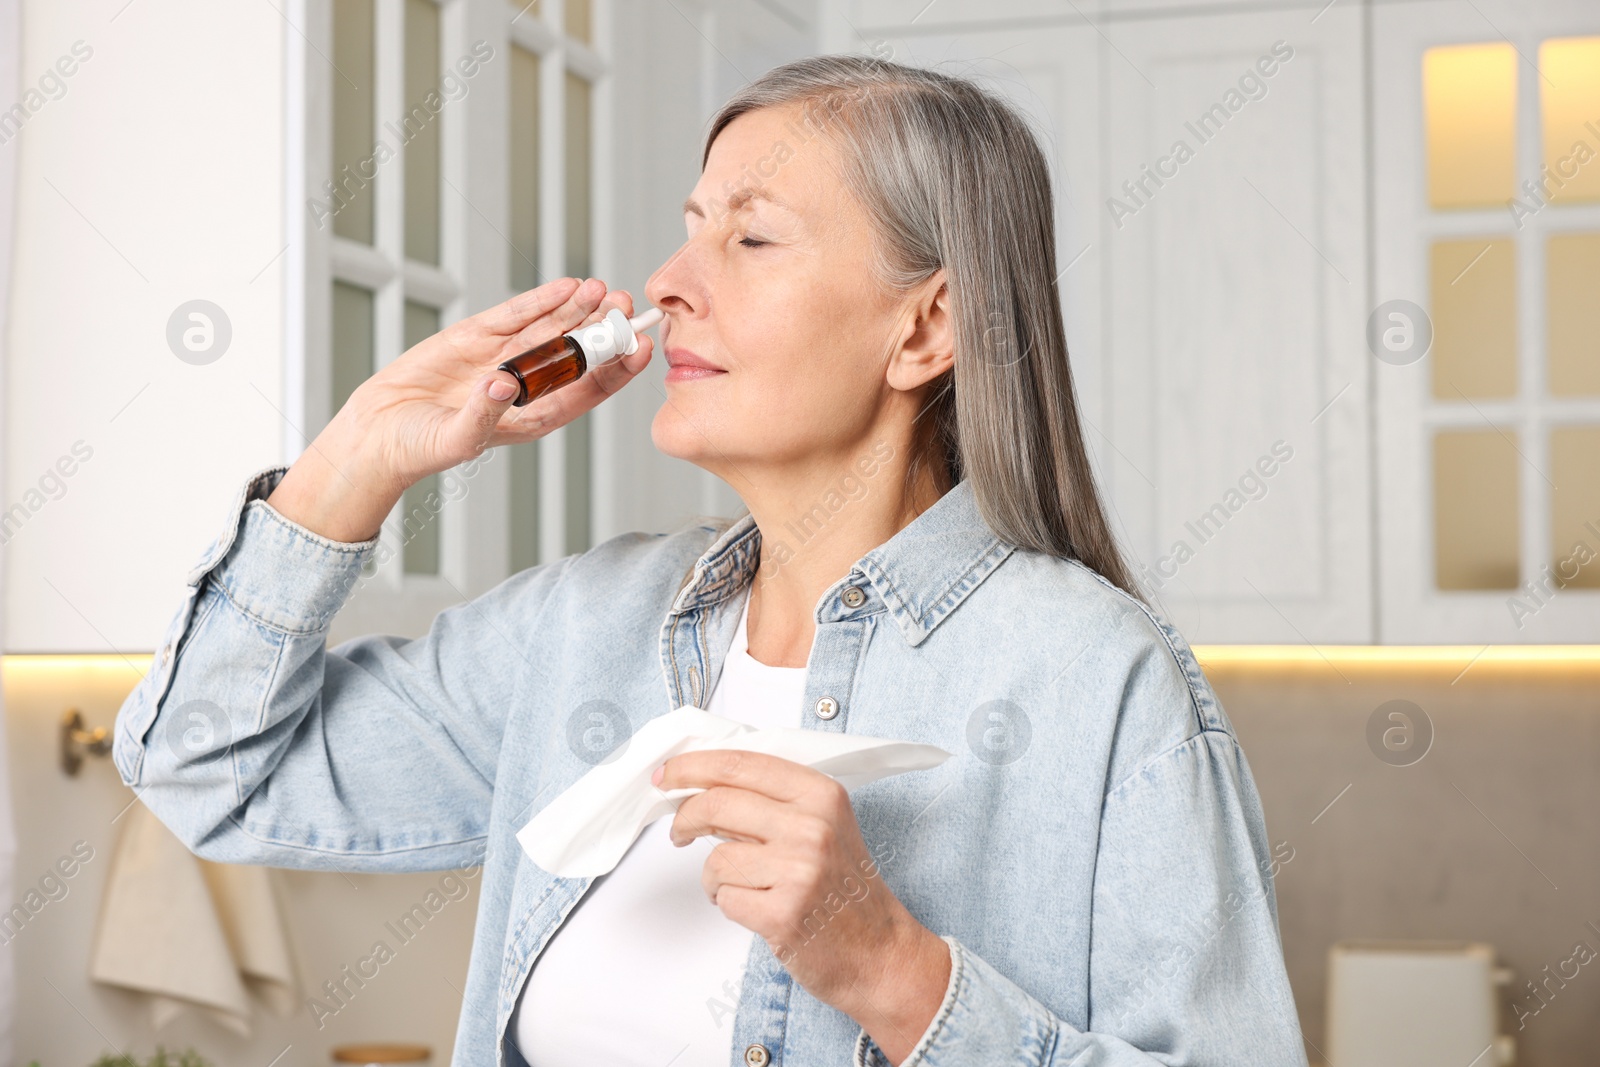 Photo of Medical drops. Woman with tissue using nasal spray indoors